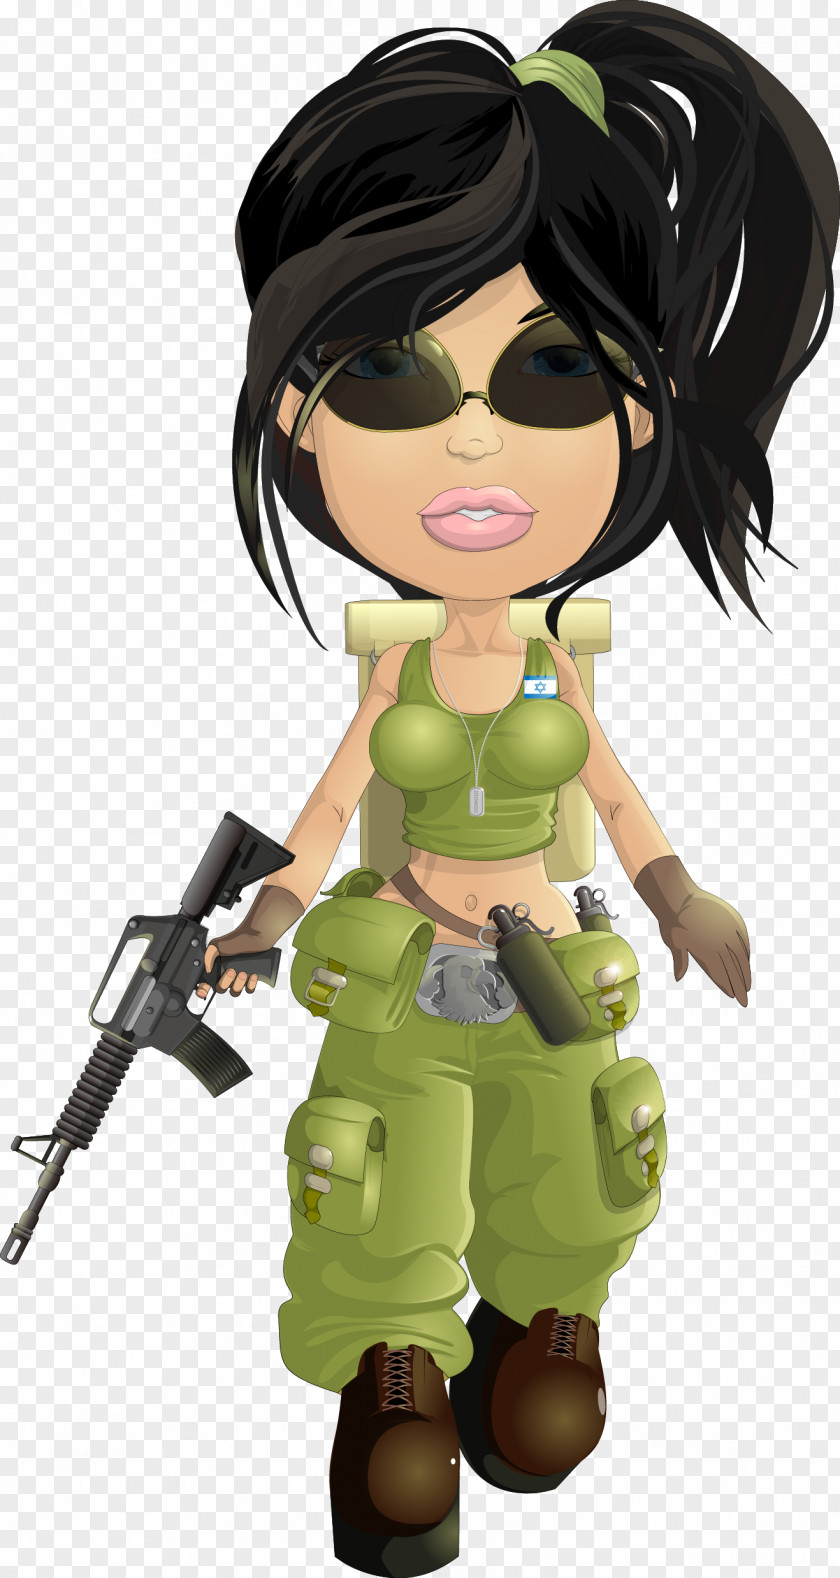 Q Version Of The Game Female Warrior Vector Material Soldier Military PNG